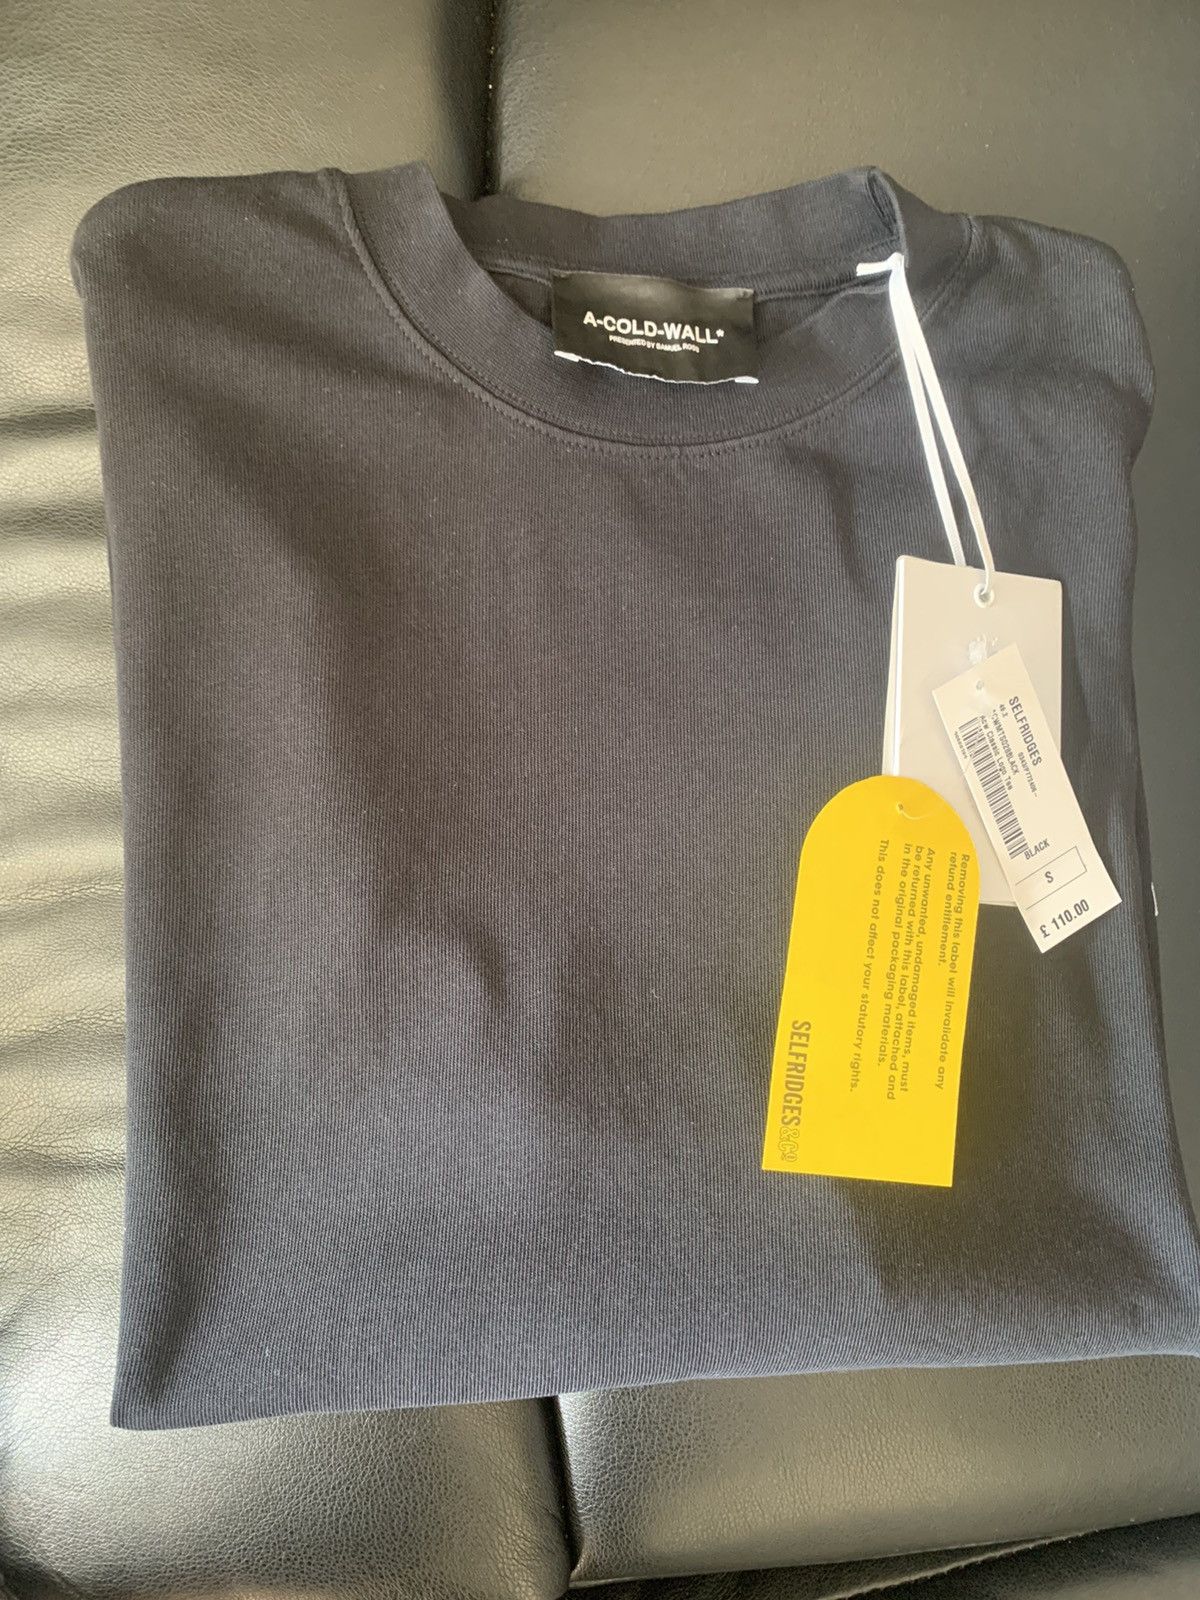 A Cold Wall A-COLD-WALL CLASSIC T SHIRT | Grailed